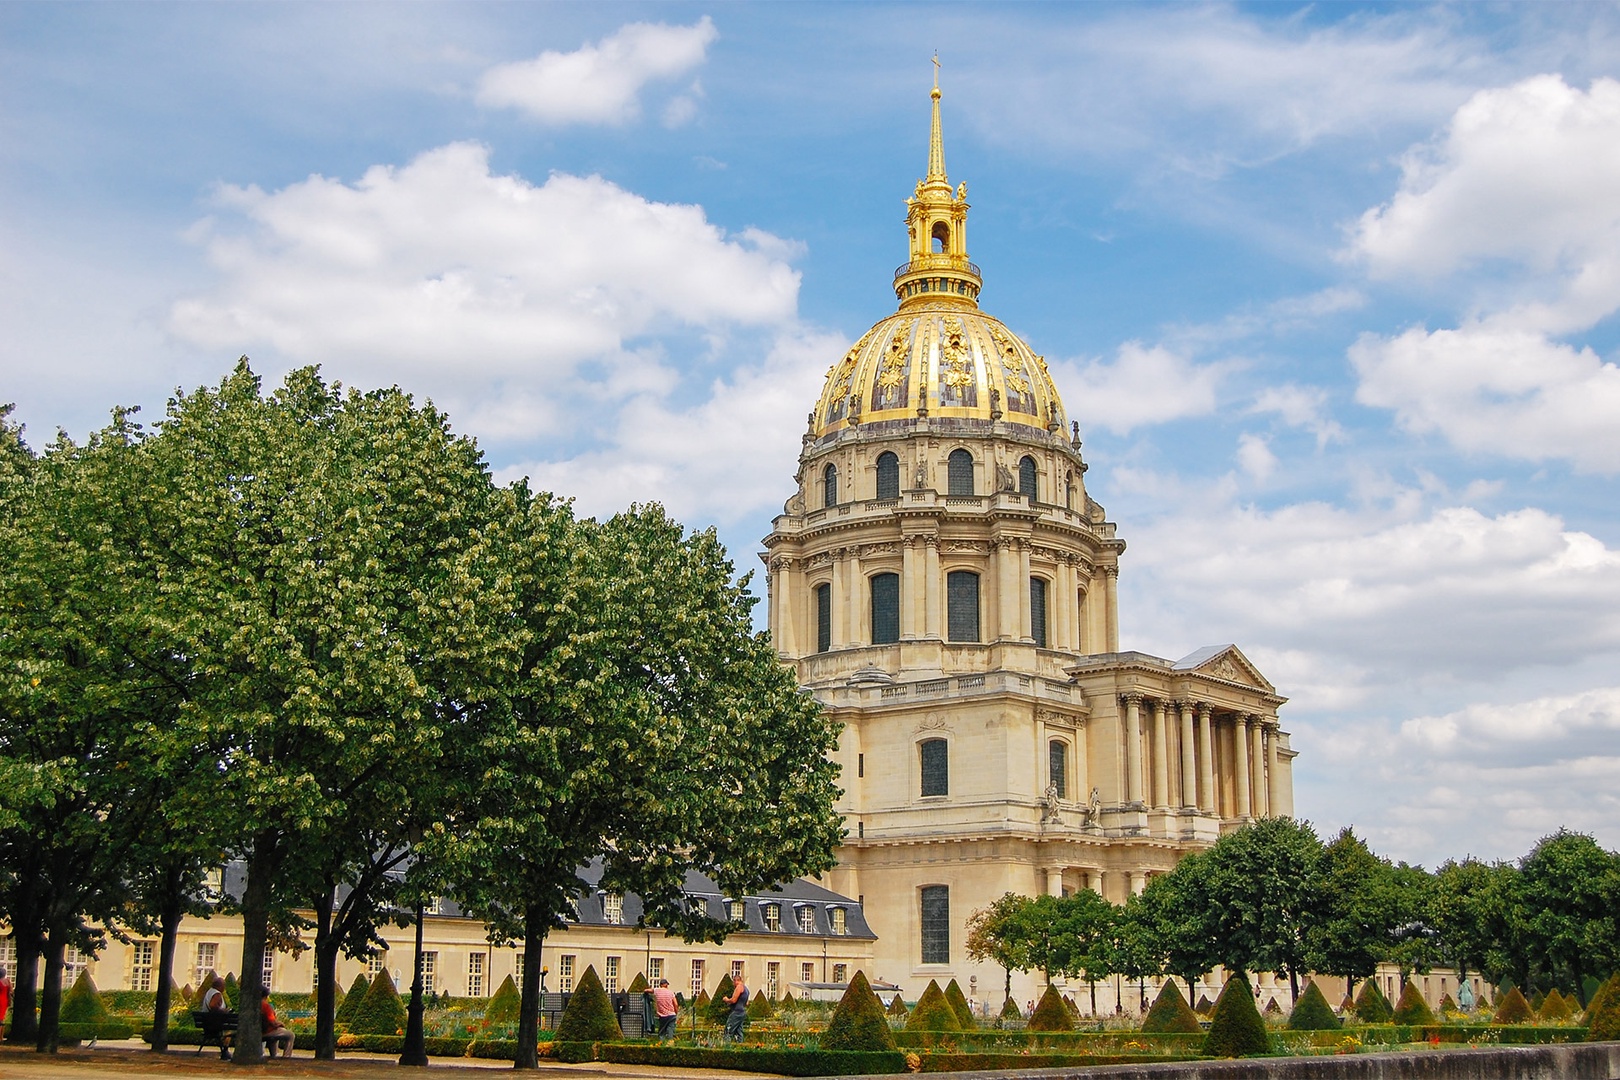 Walk to the Invalides and Napoleon's tomb.